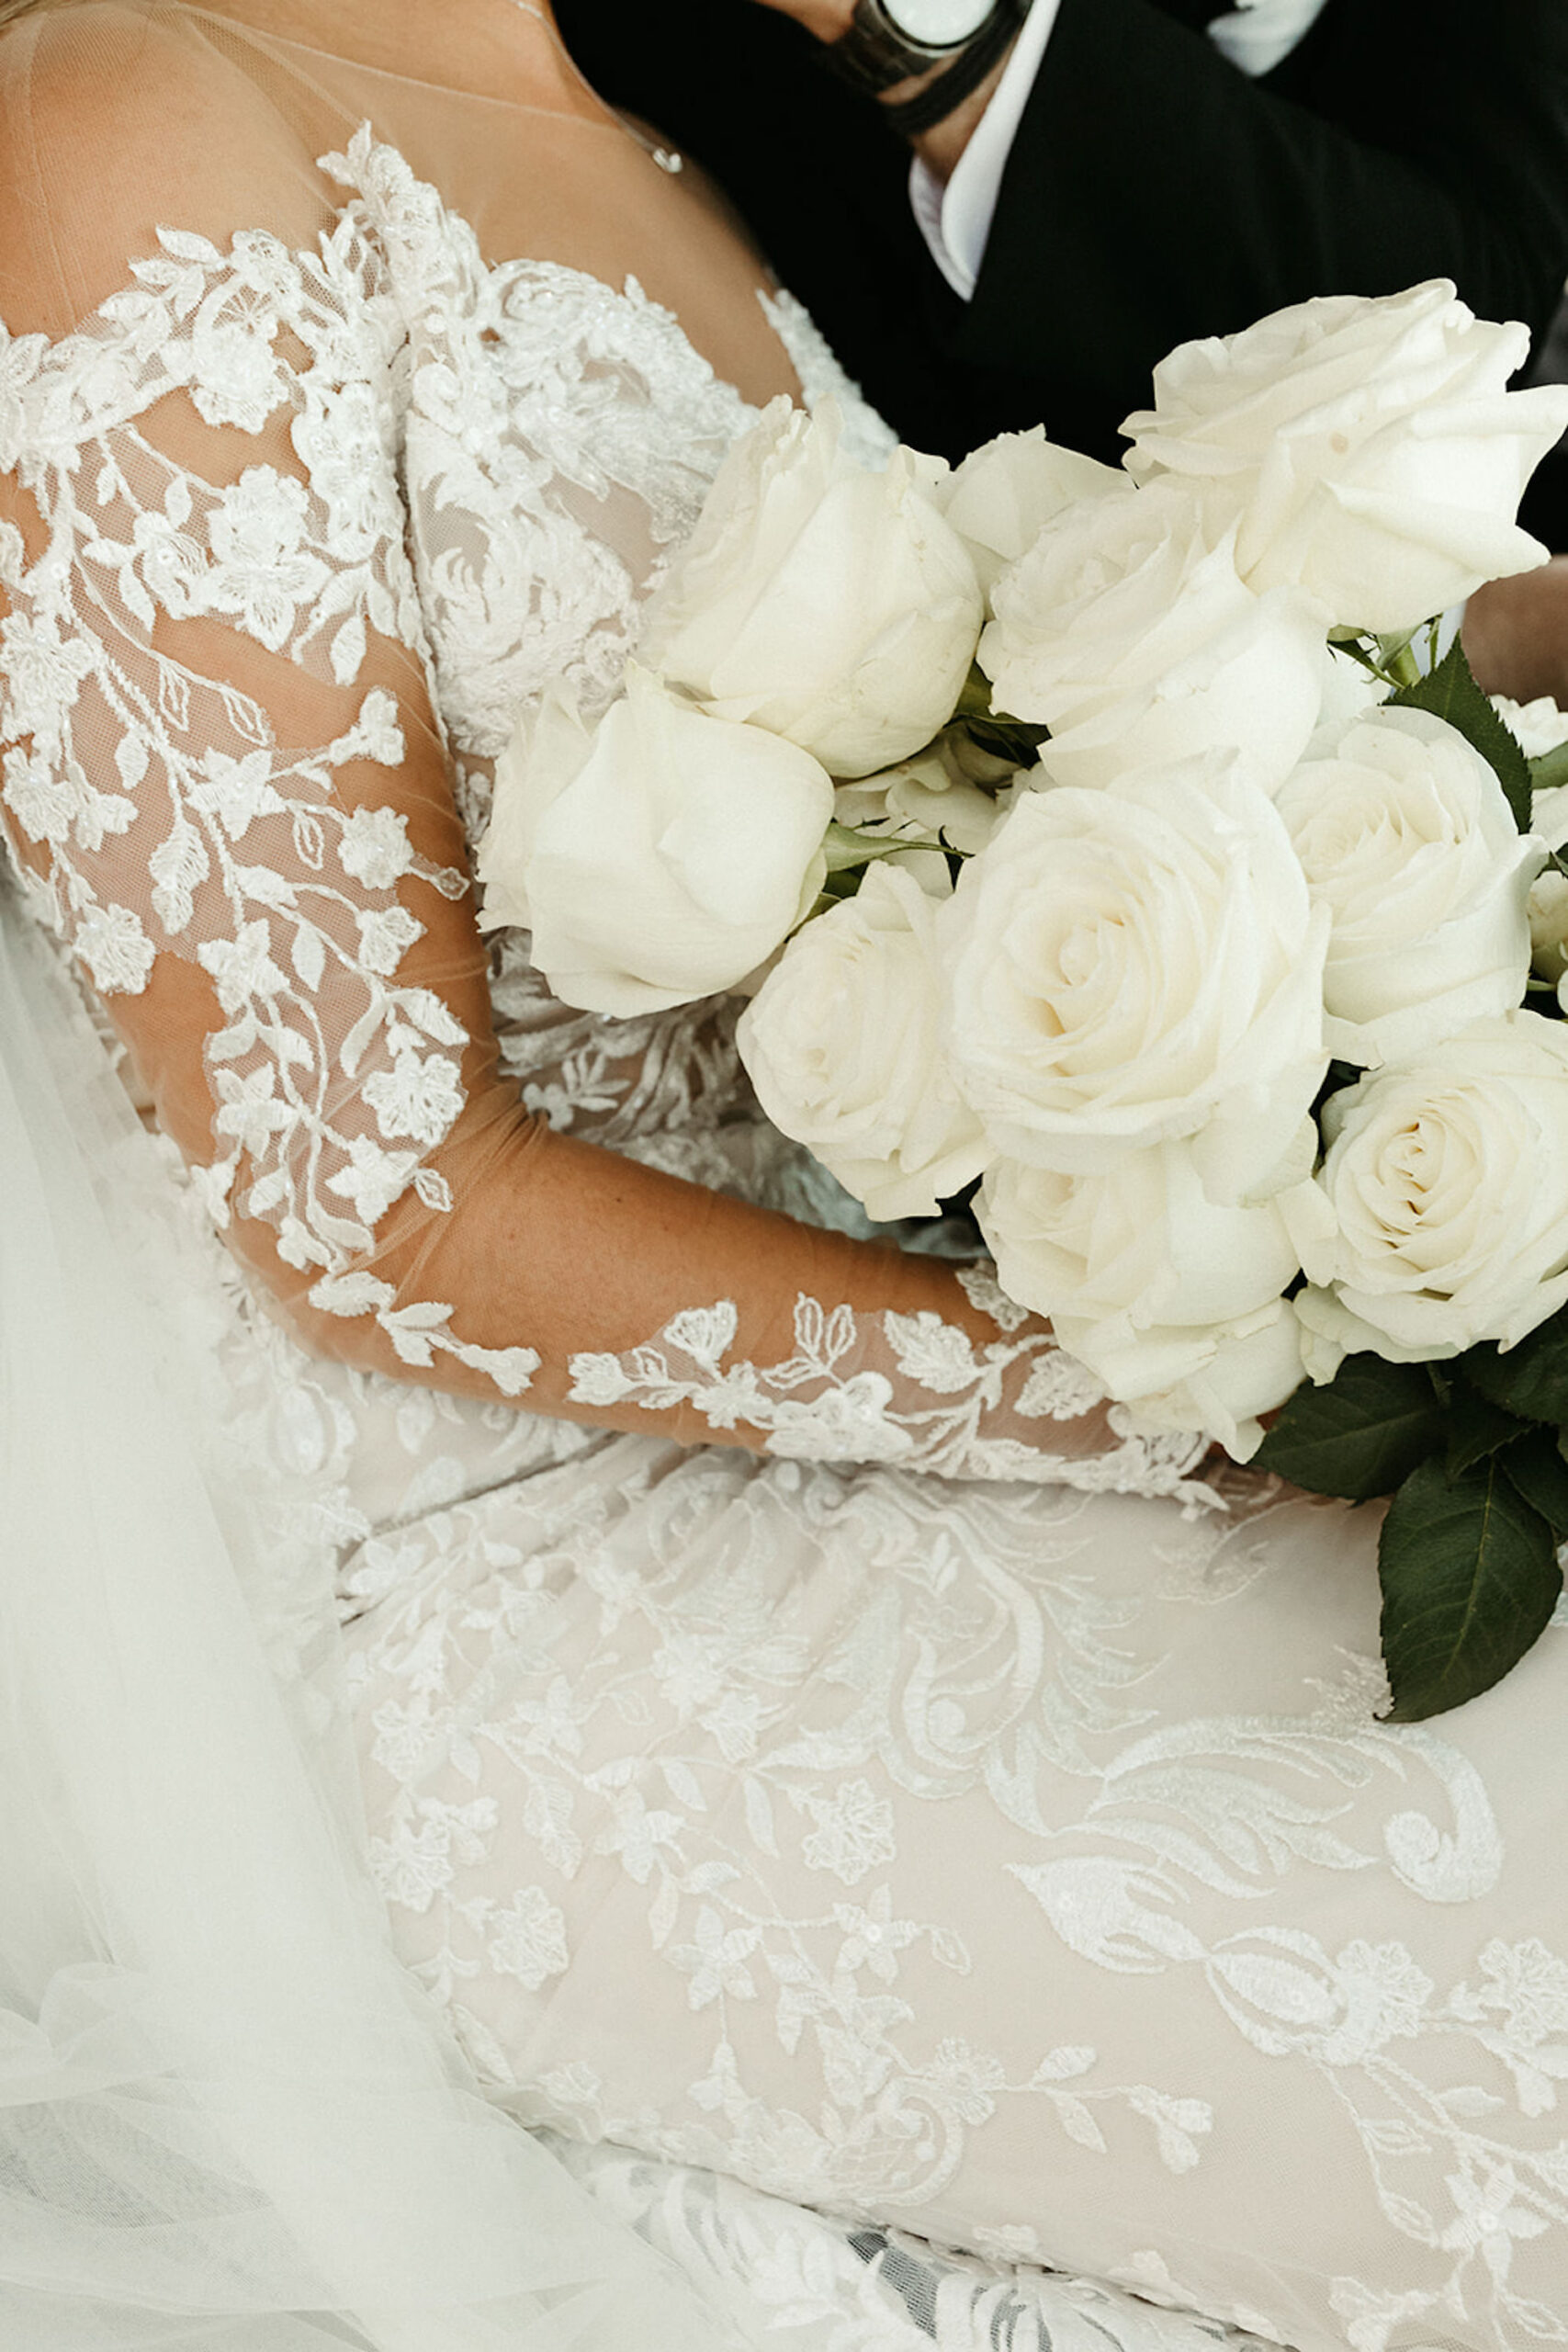 Bride in Long Sleeve Lace Sheer Wedding Dress with White Peony Bouquet